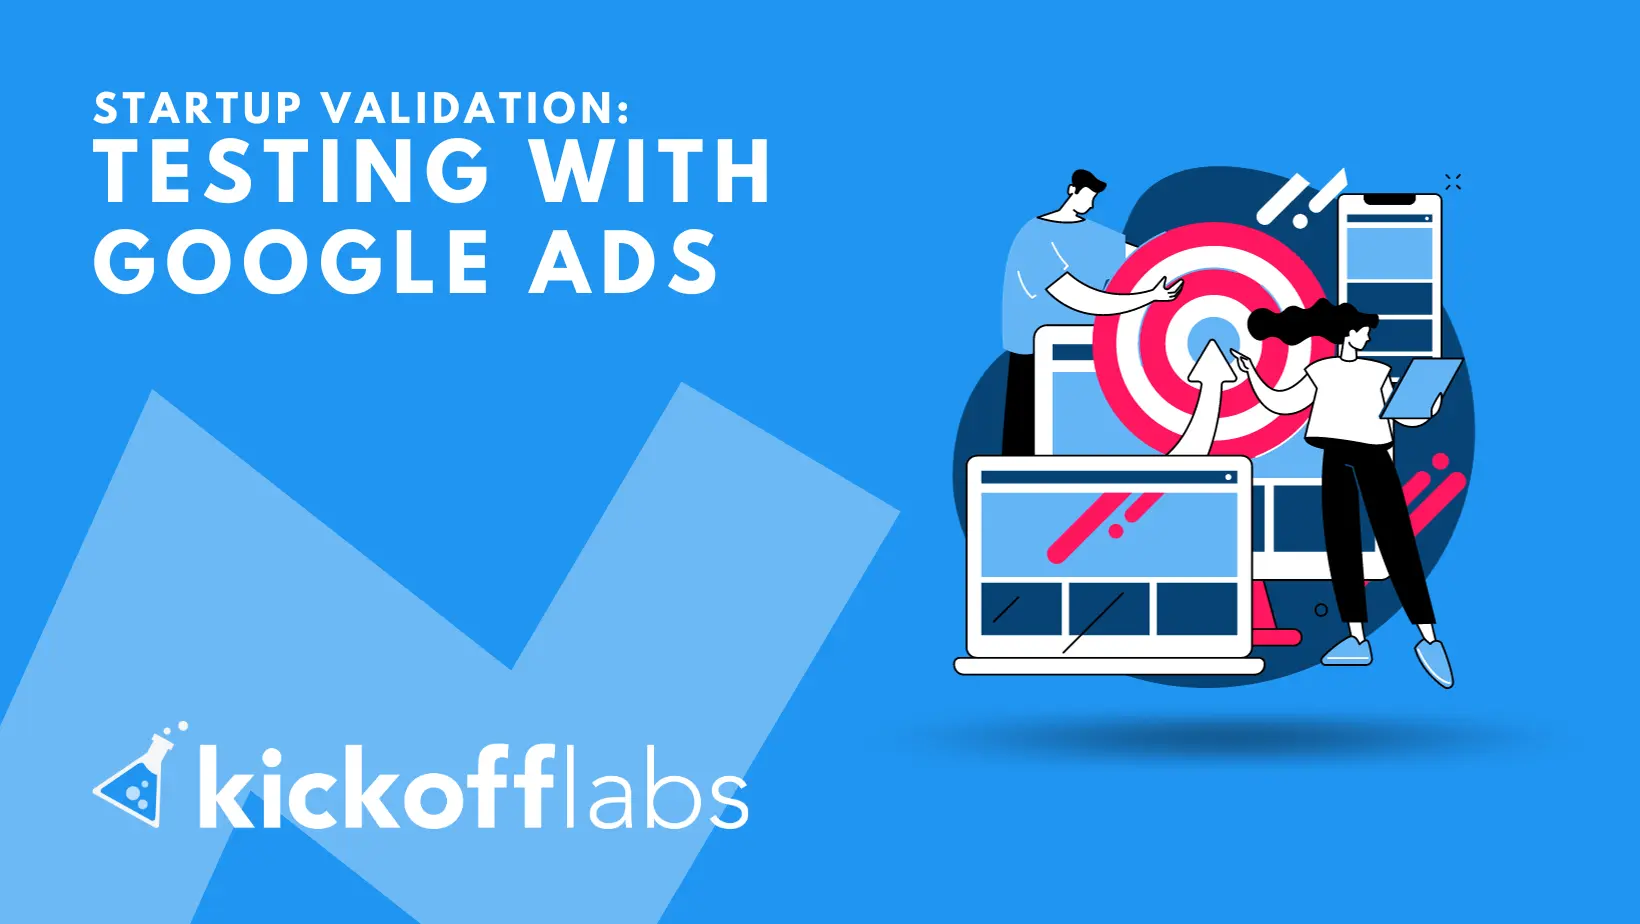 Using Google Ads to Validate Your Startup